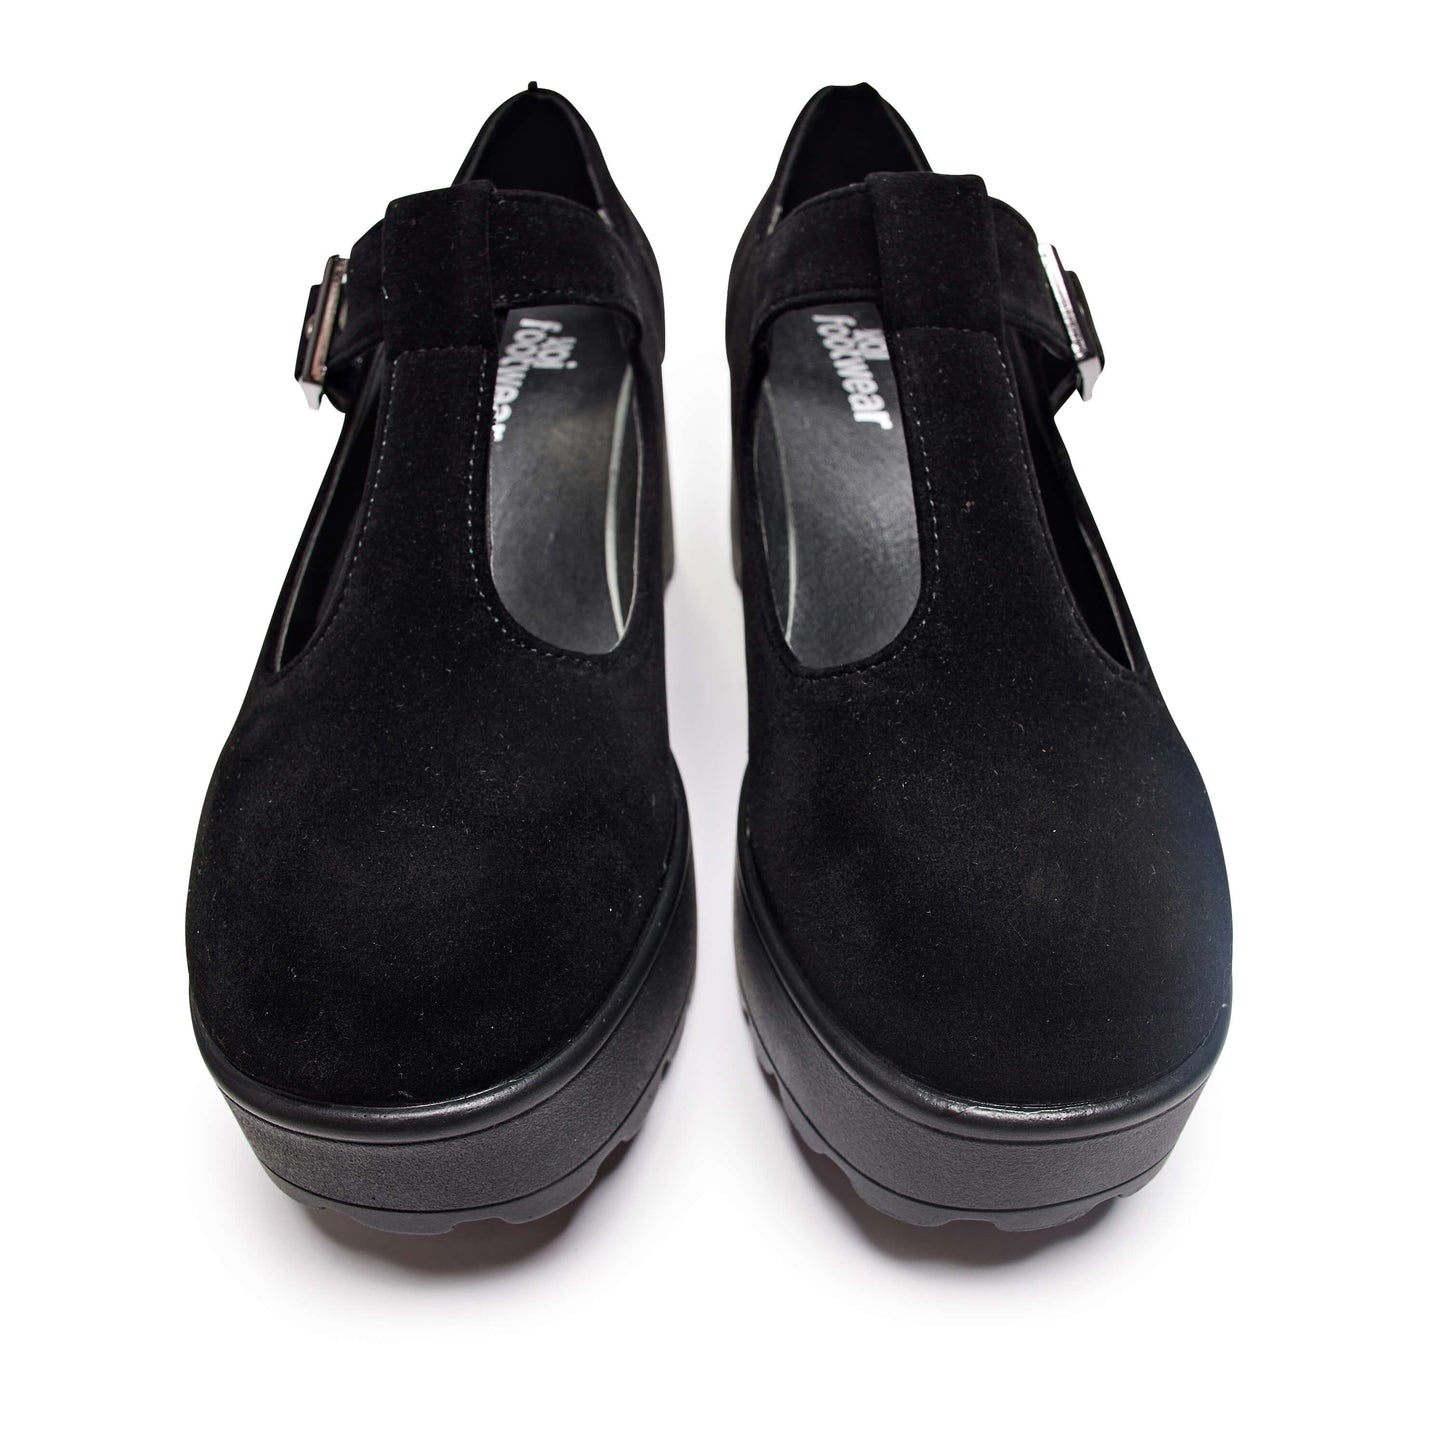 Sai Black Mary Jane Shoes 'Suede Edition' - Mary Janes - KOI Footwear - Black - Front Detail